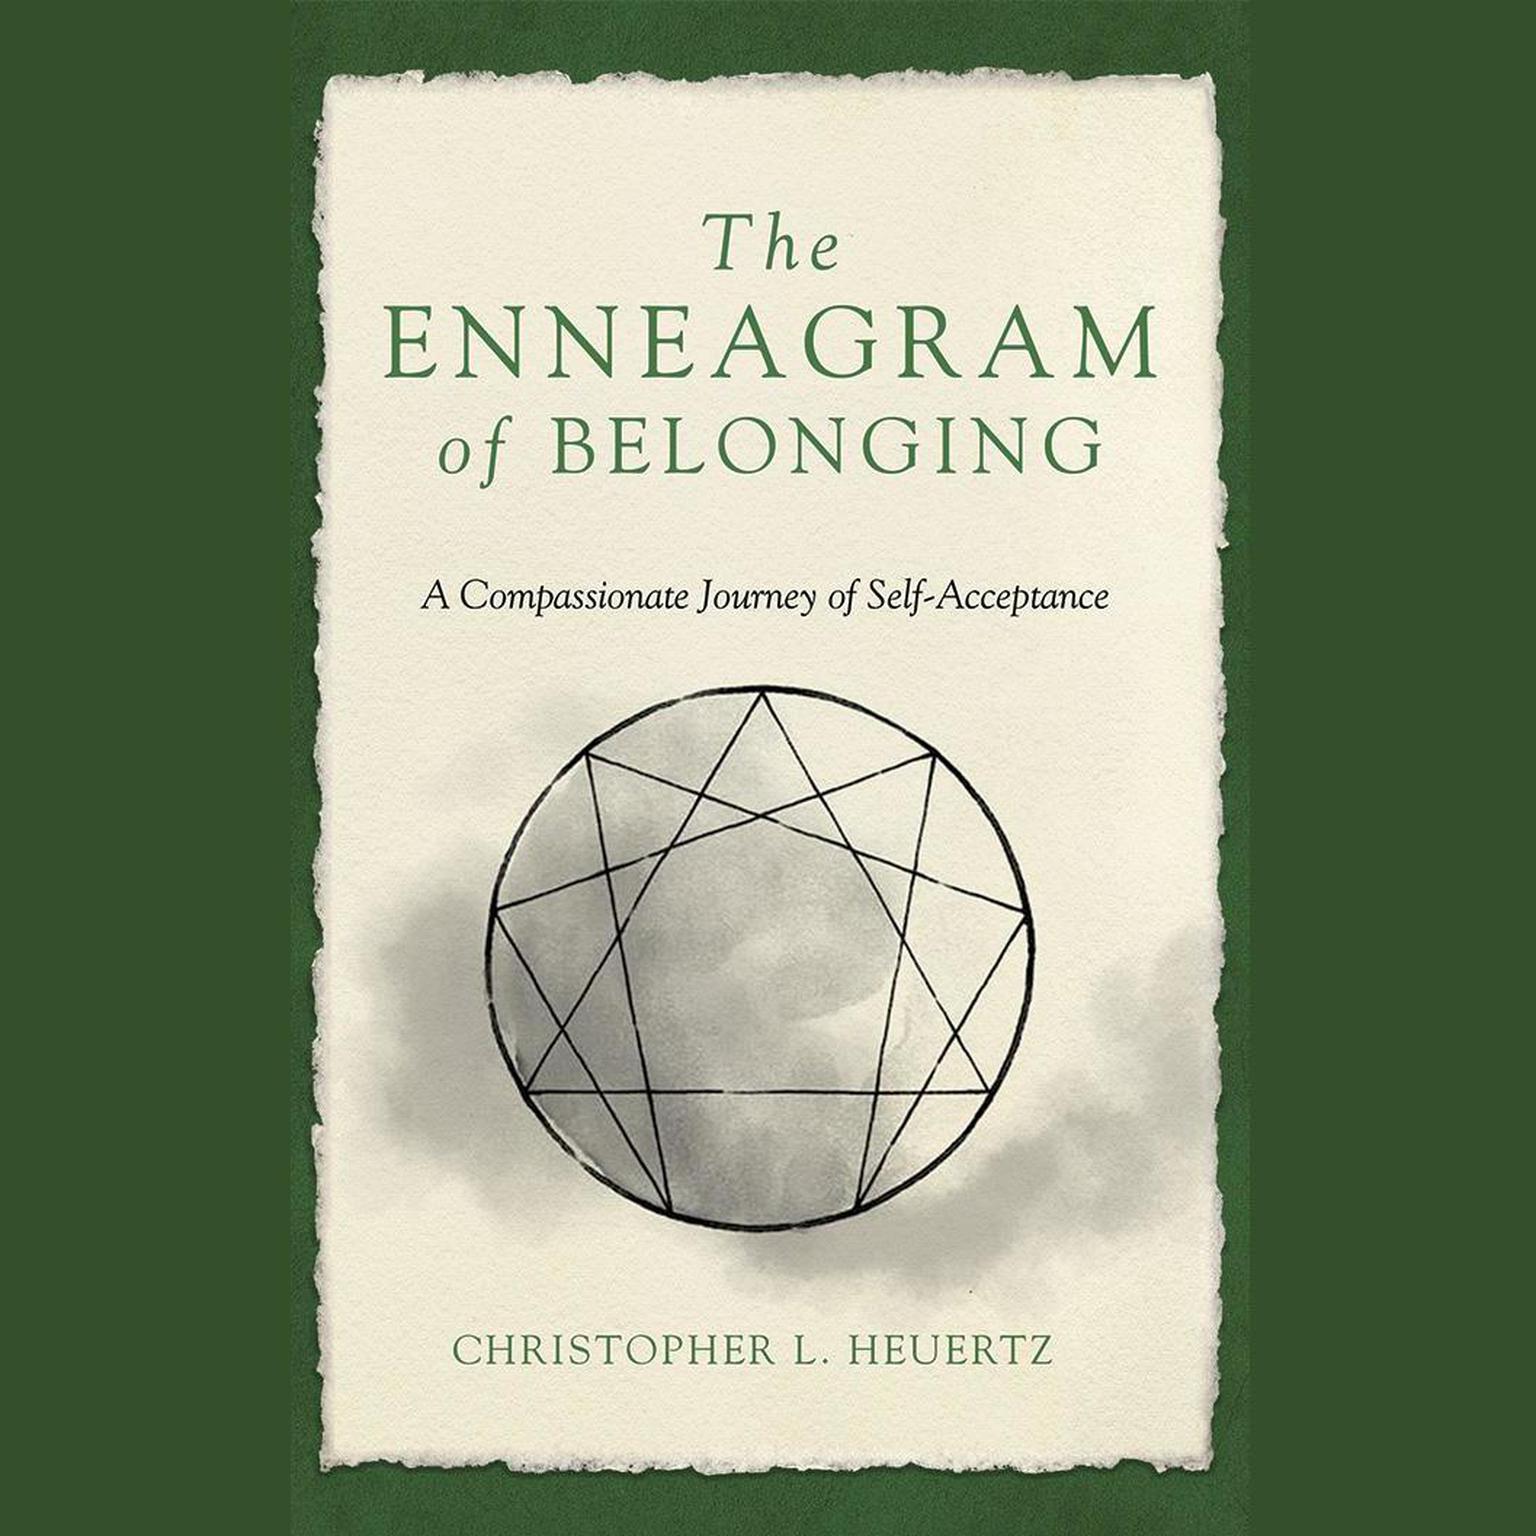 The Enneagram of Belonging: A Compassionate Journey of Self-Acceptance Audiobook, by Christopher L. Heuertz